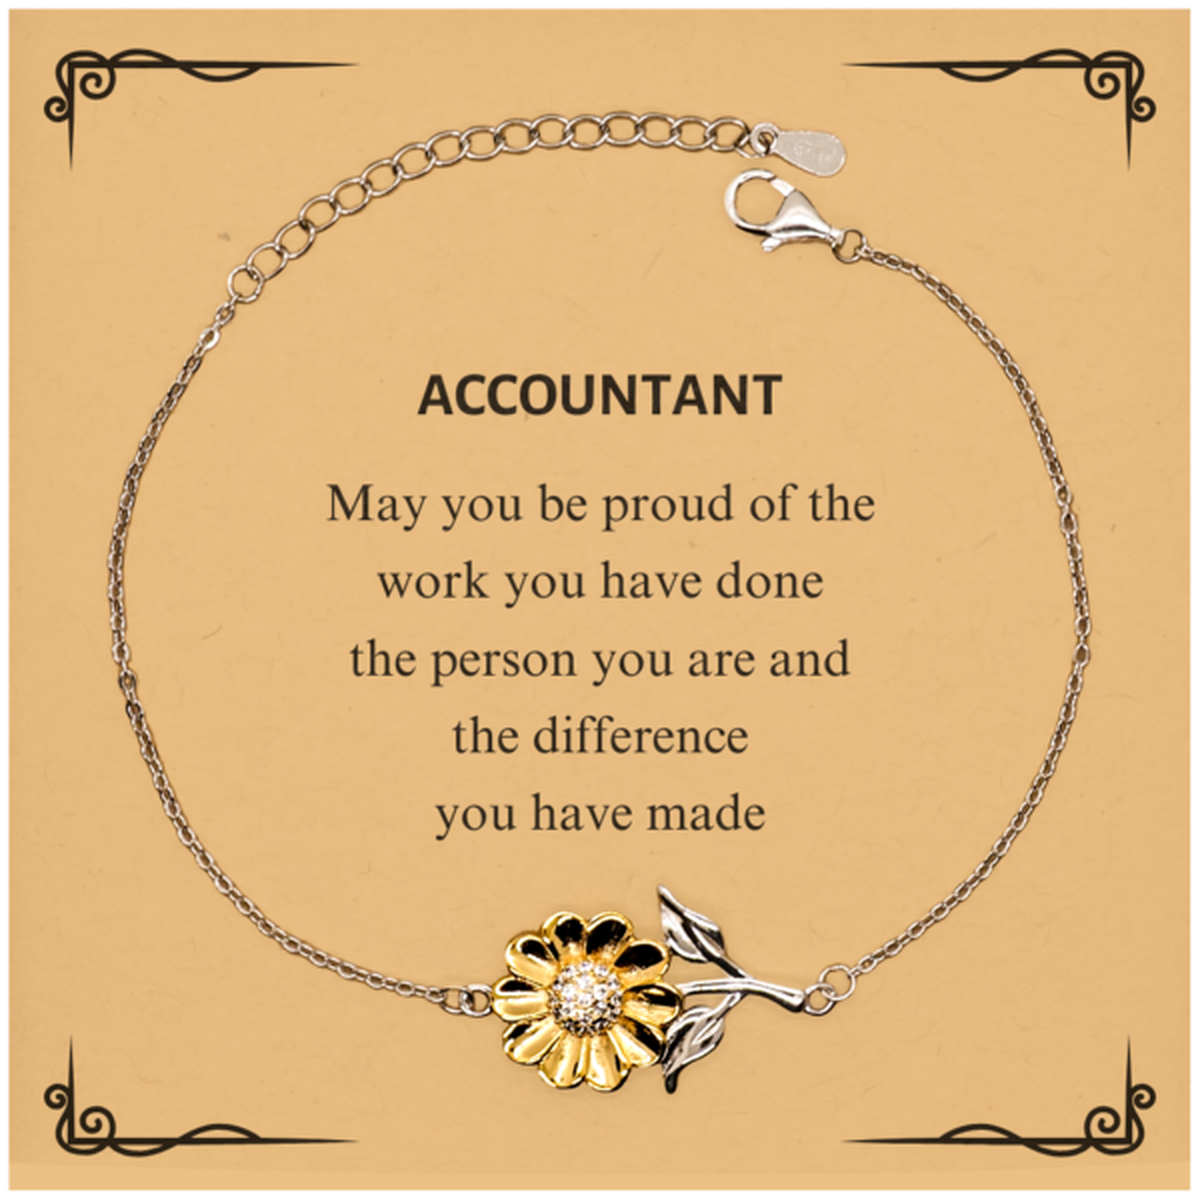 Accountant May you be proud of the work you have done, Retirement Accountant Sunflower Bracelet for Colleague Appreciation Gifts Amazing for Accountant